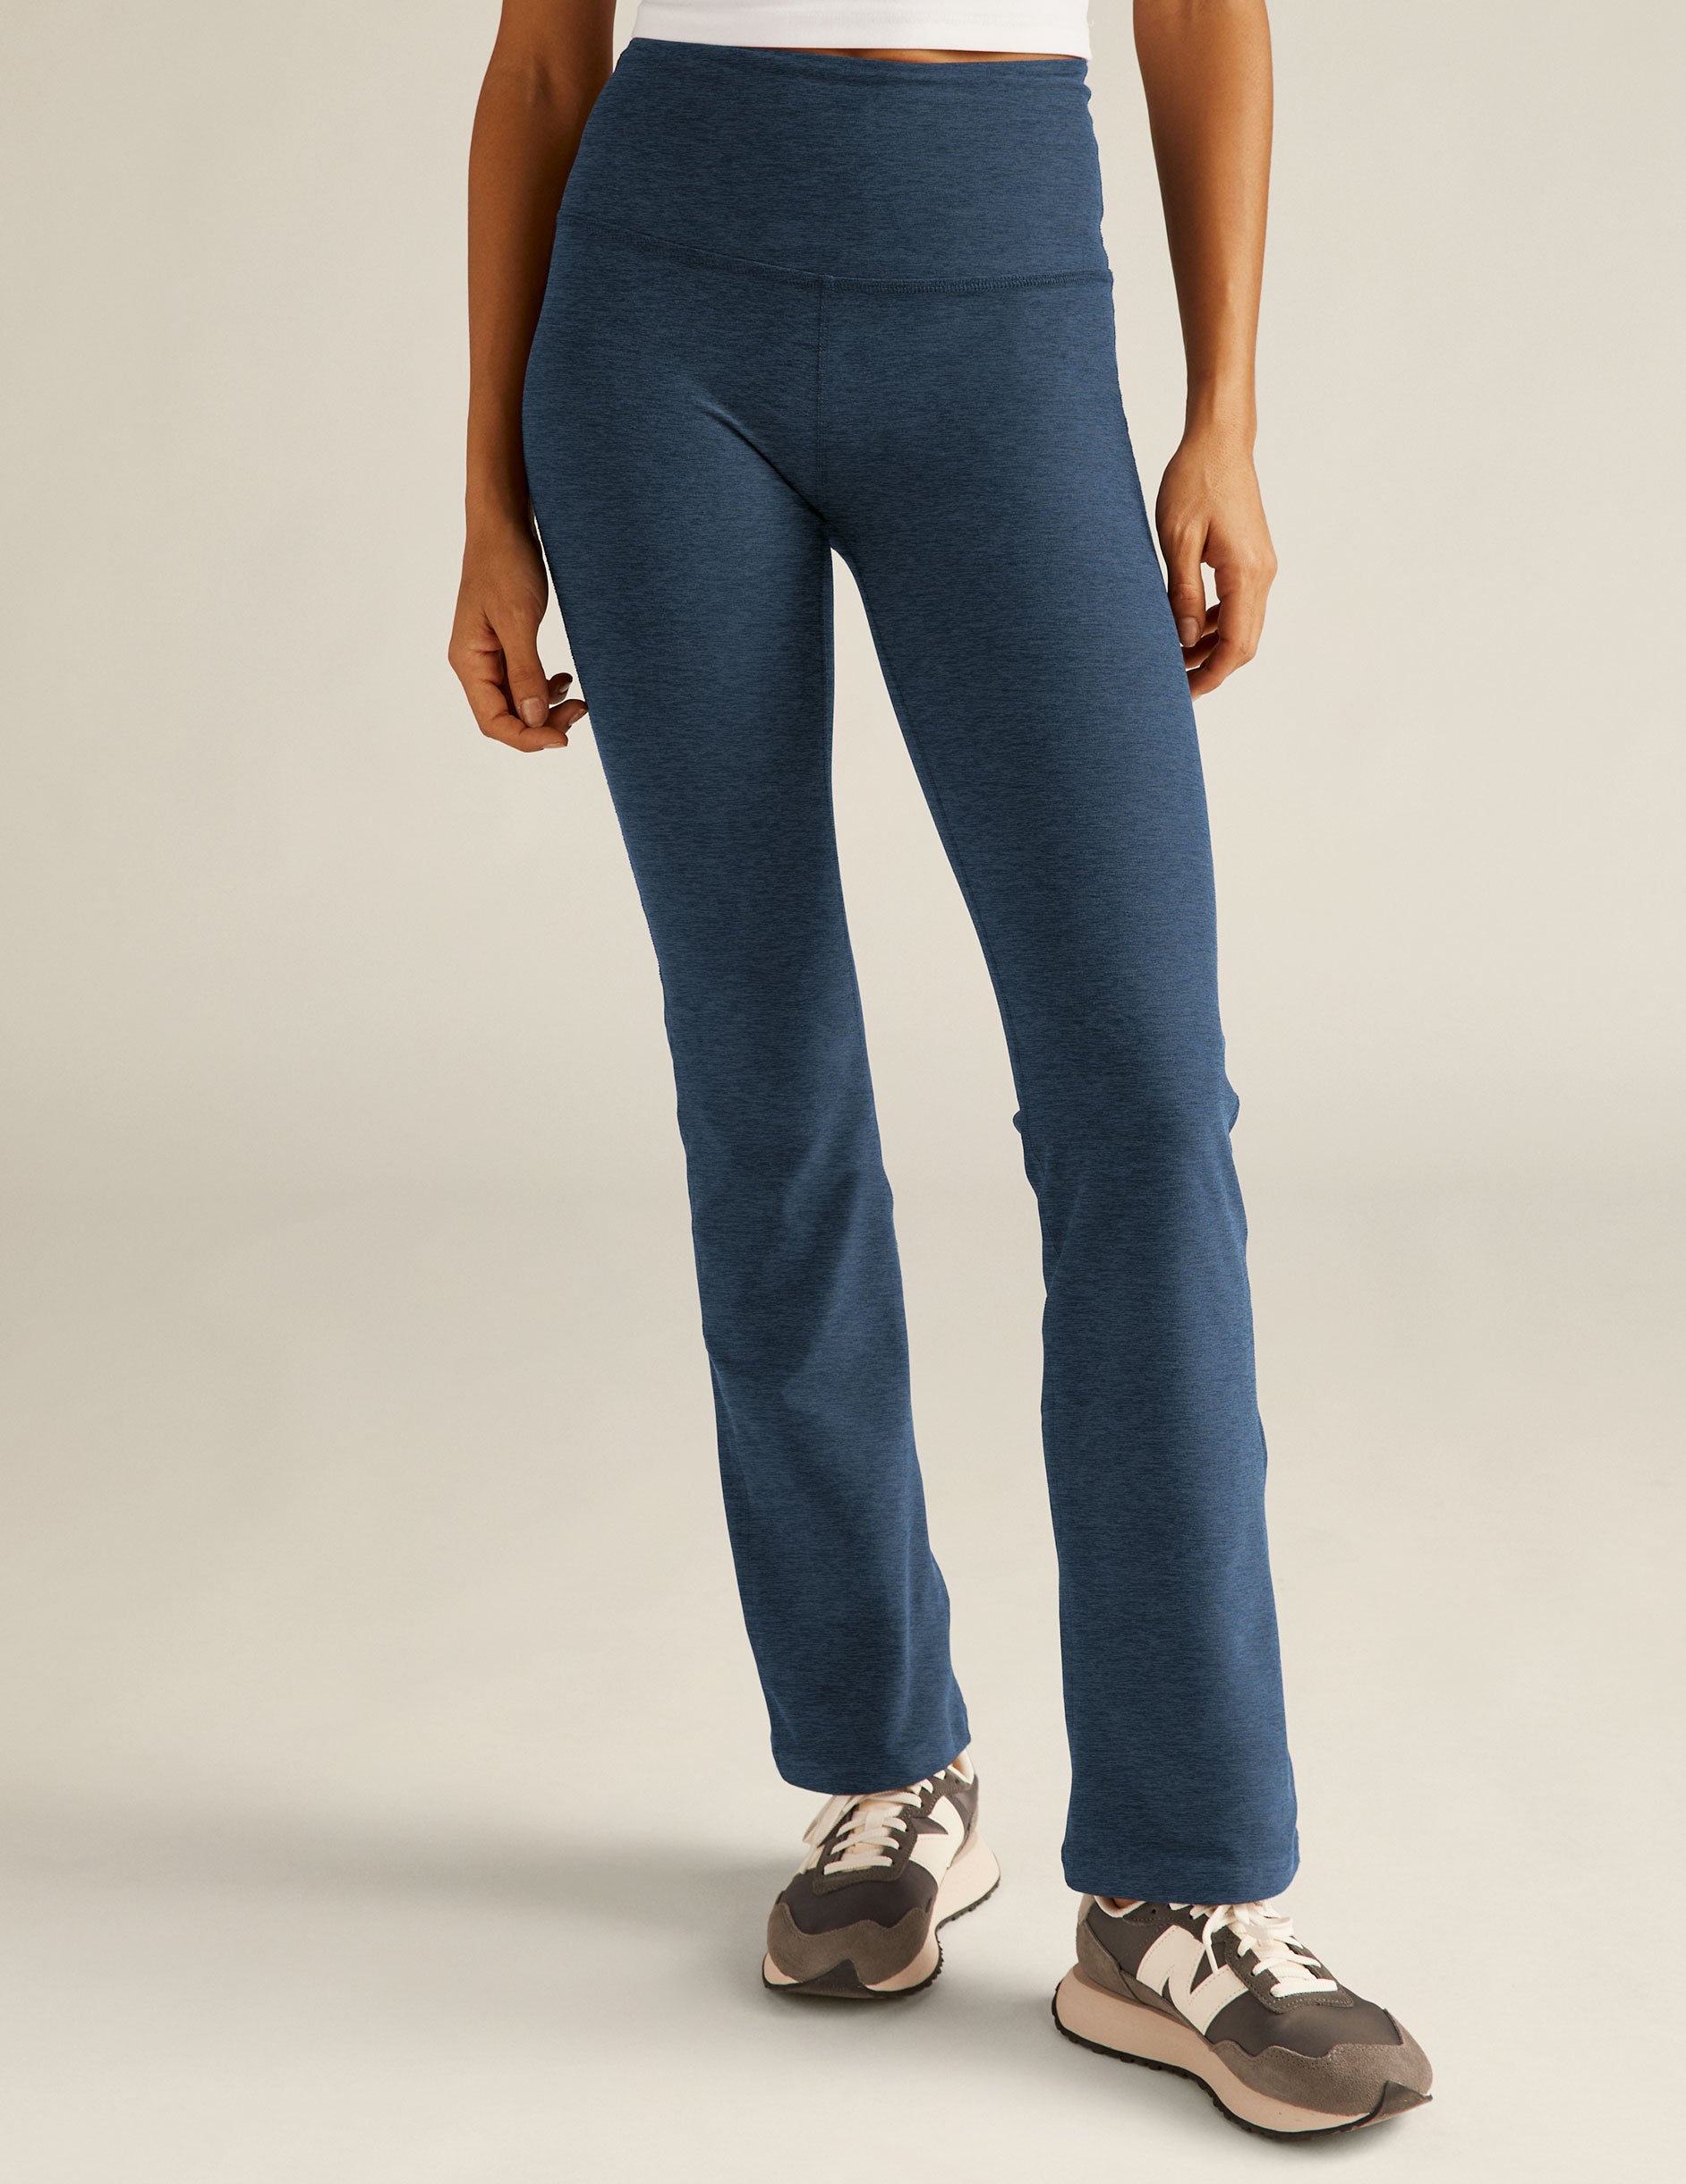 Urban Outfitters Beyond Yoga High-Waisted Practice Pant